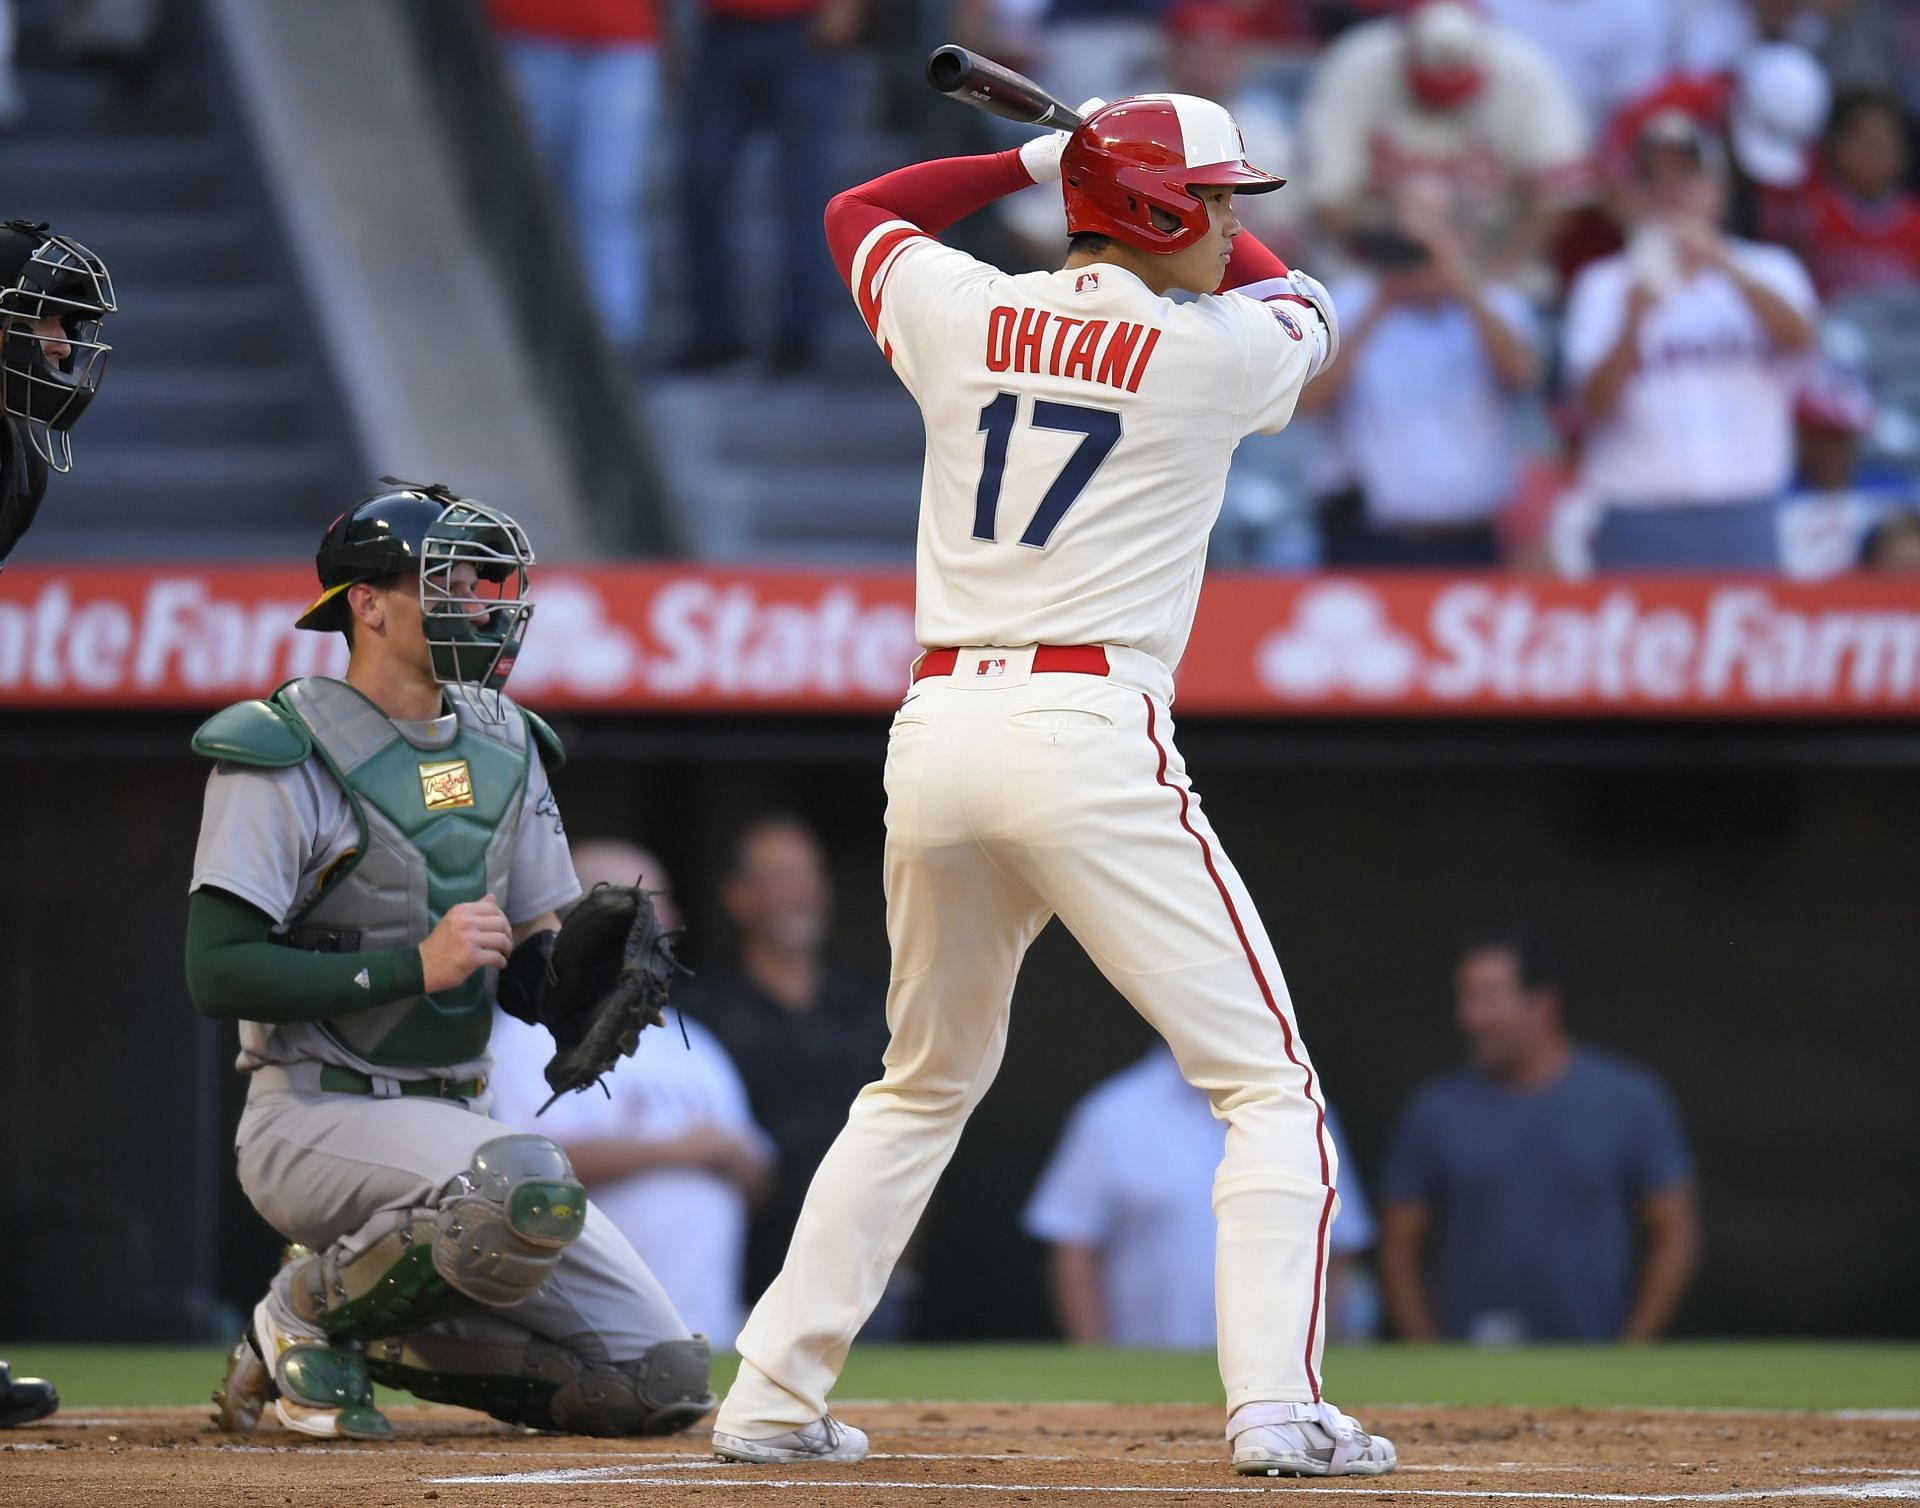 Shohei Ohtani of the Angels bats in a game versus the Athletics.